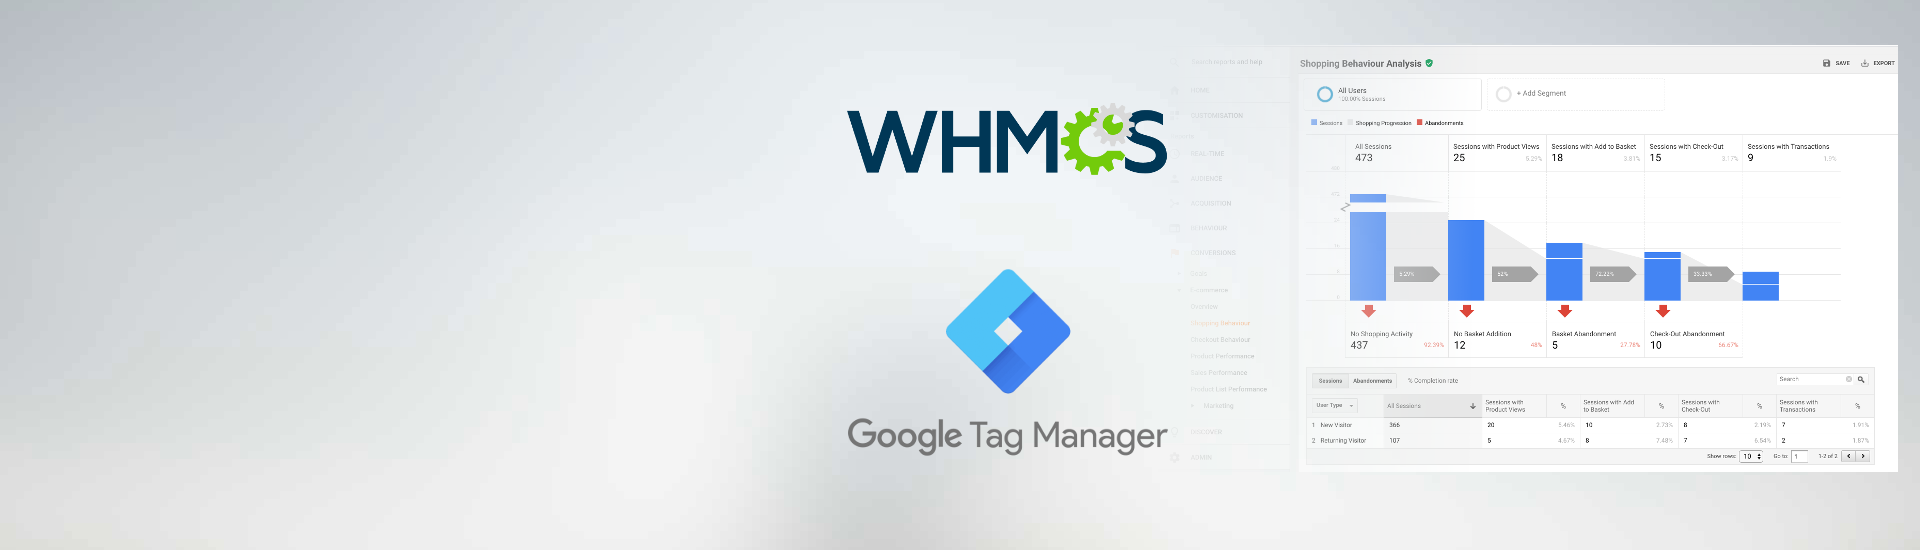 WHMCS Google Tag Manager